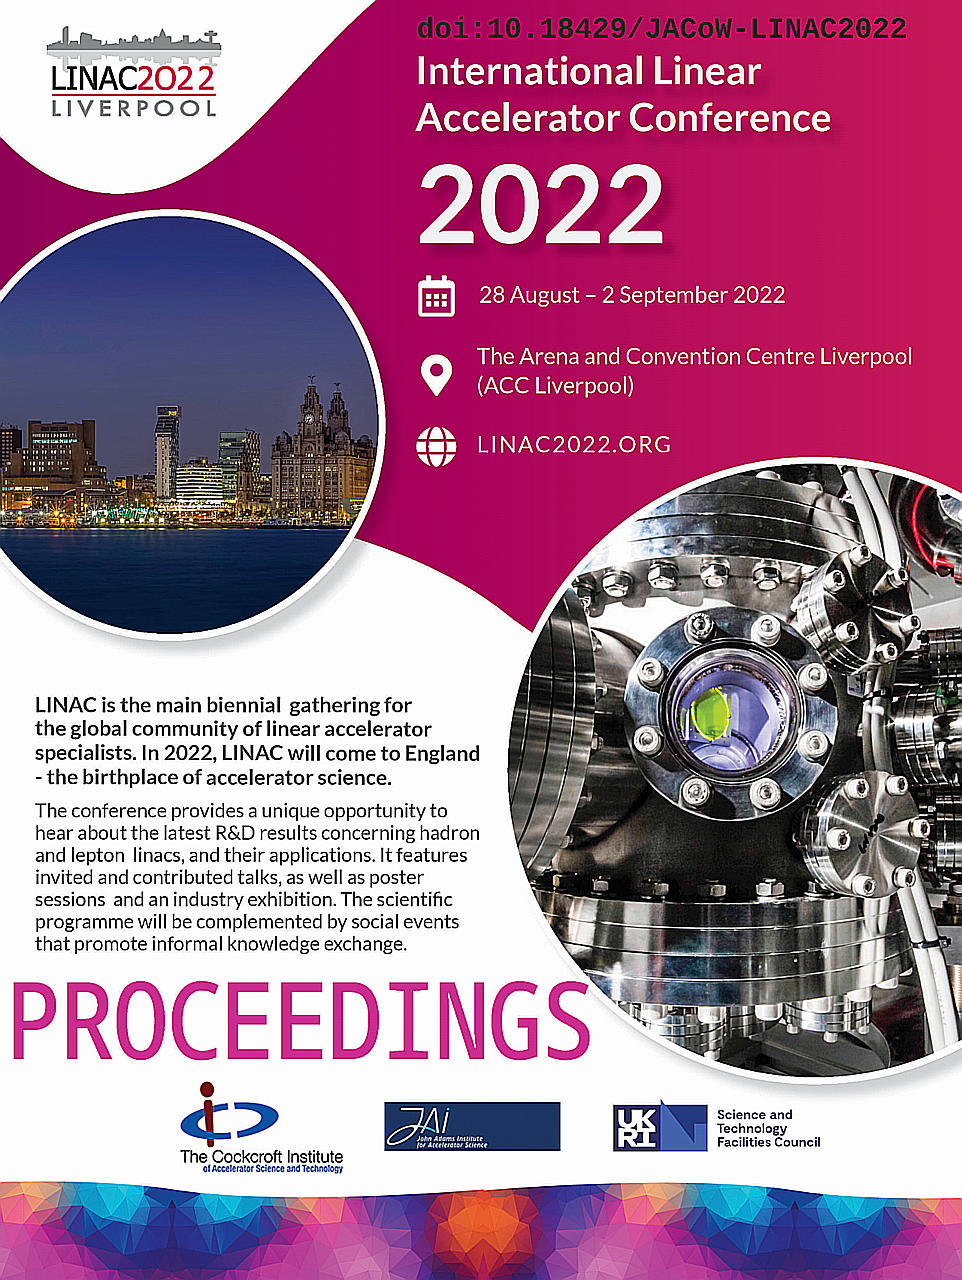 LINAC2022 conference poster